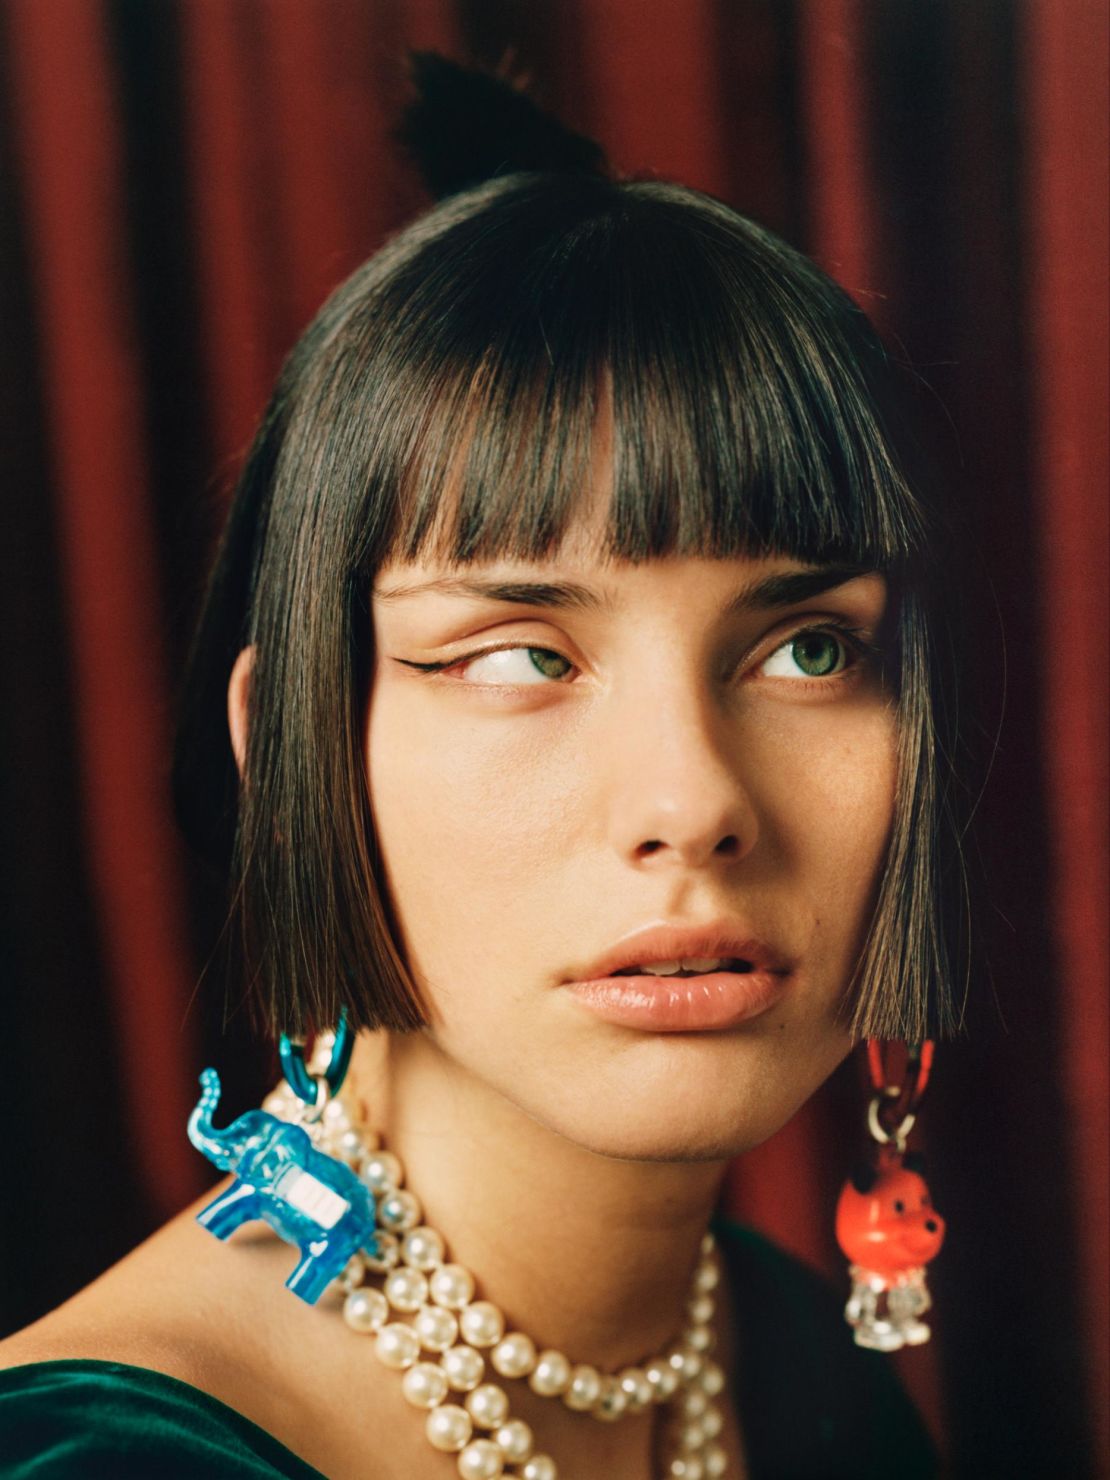 "Moffy with Earrings" (2018) by Hanna Moon, shot at Somerset House